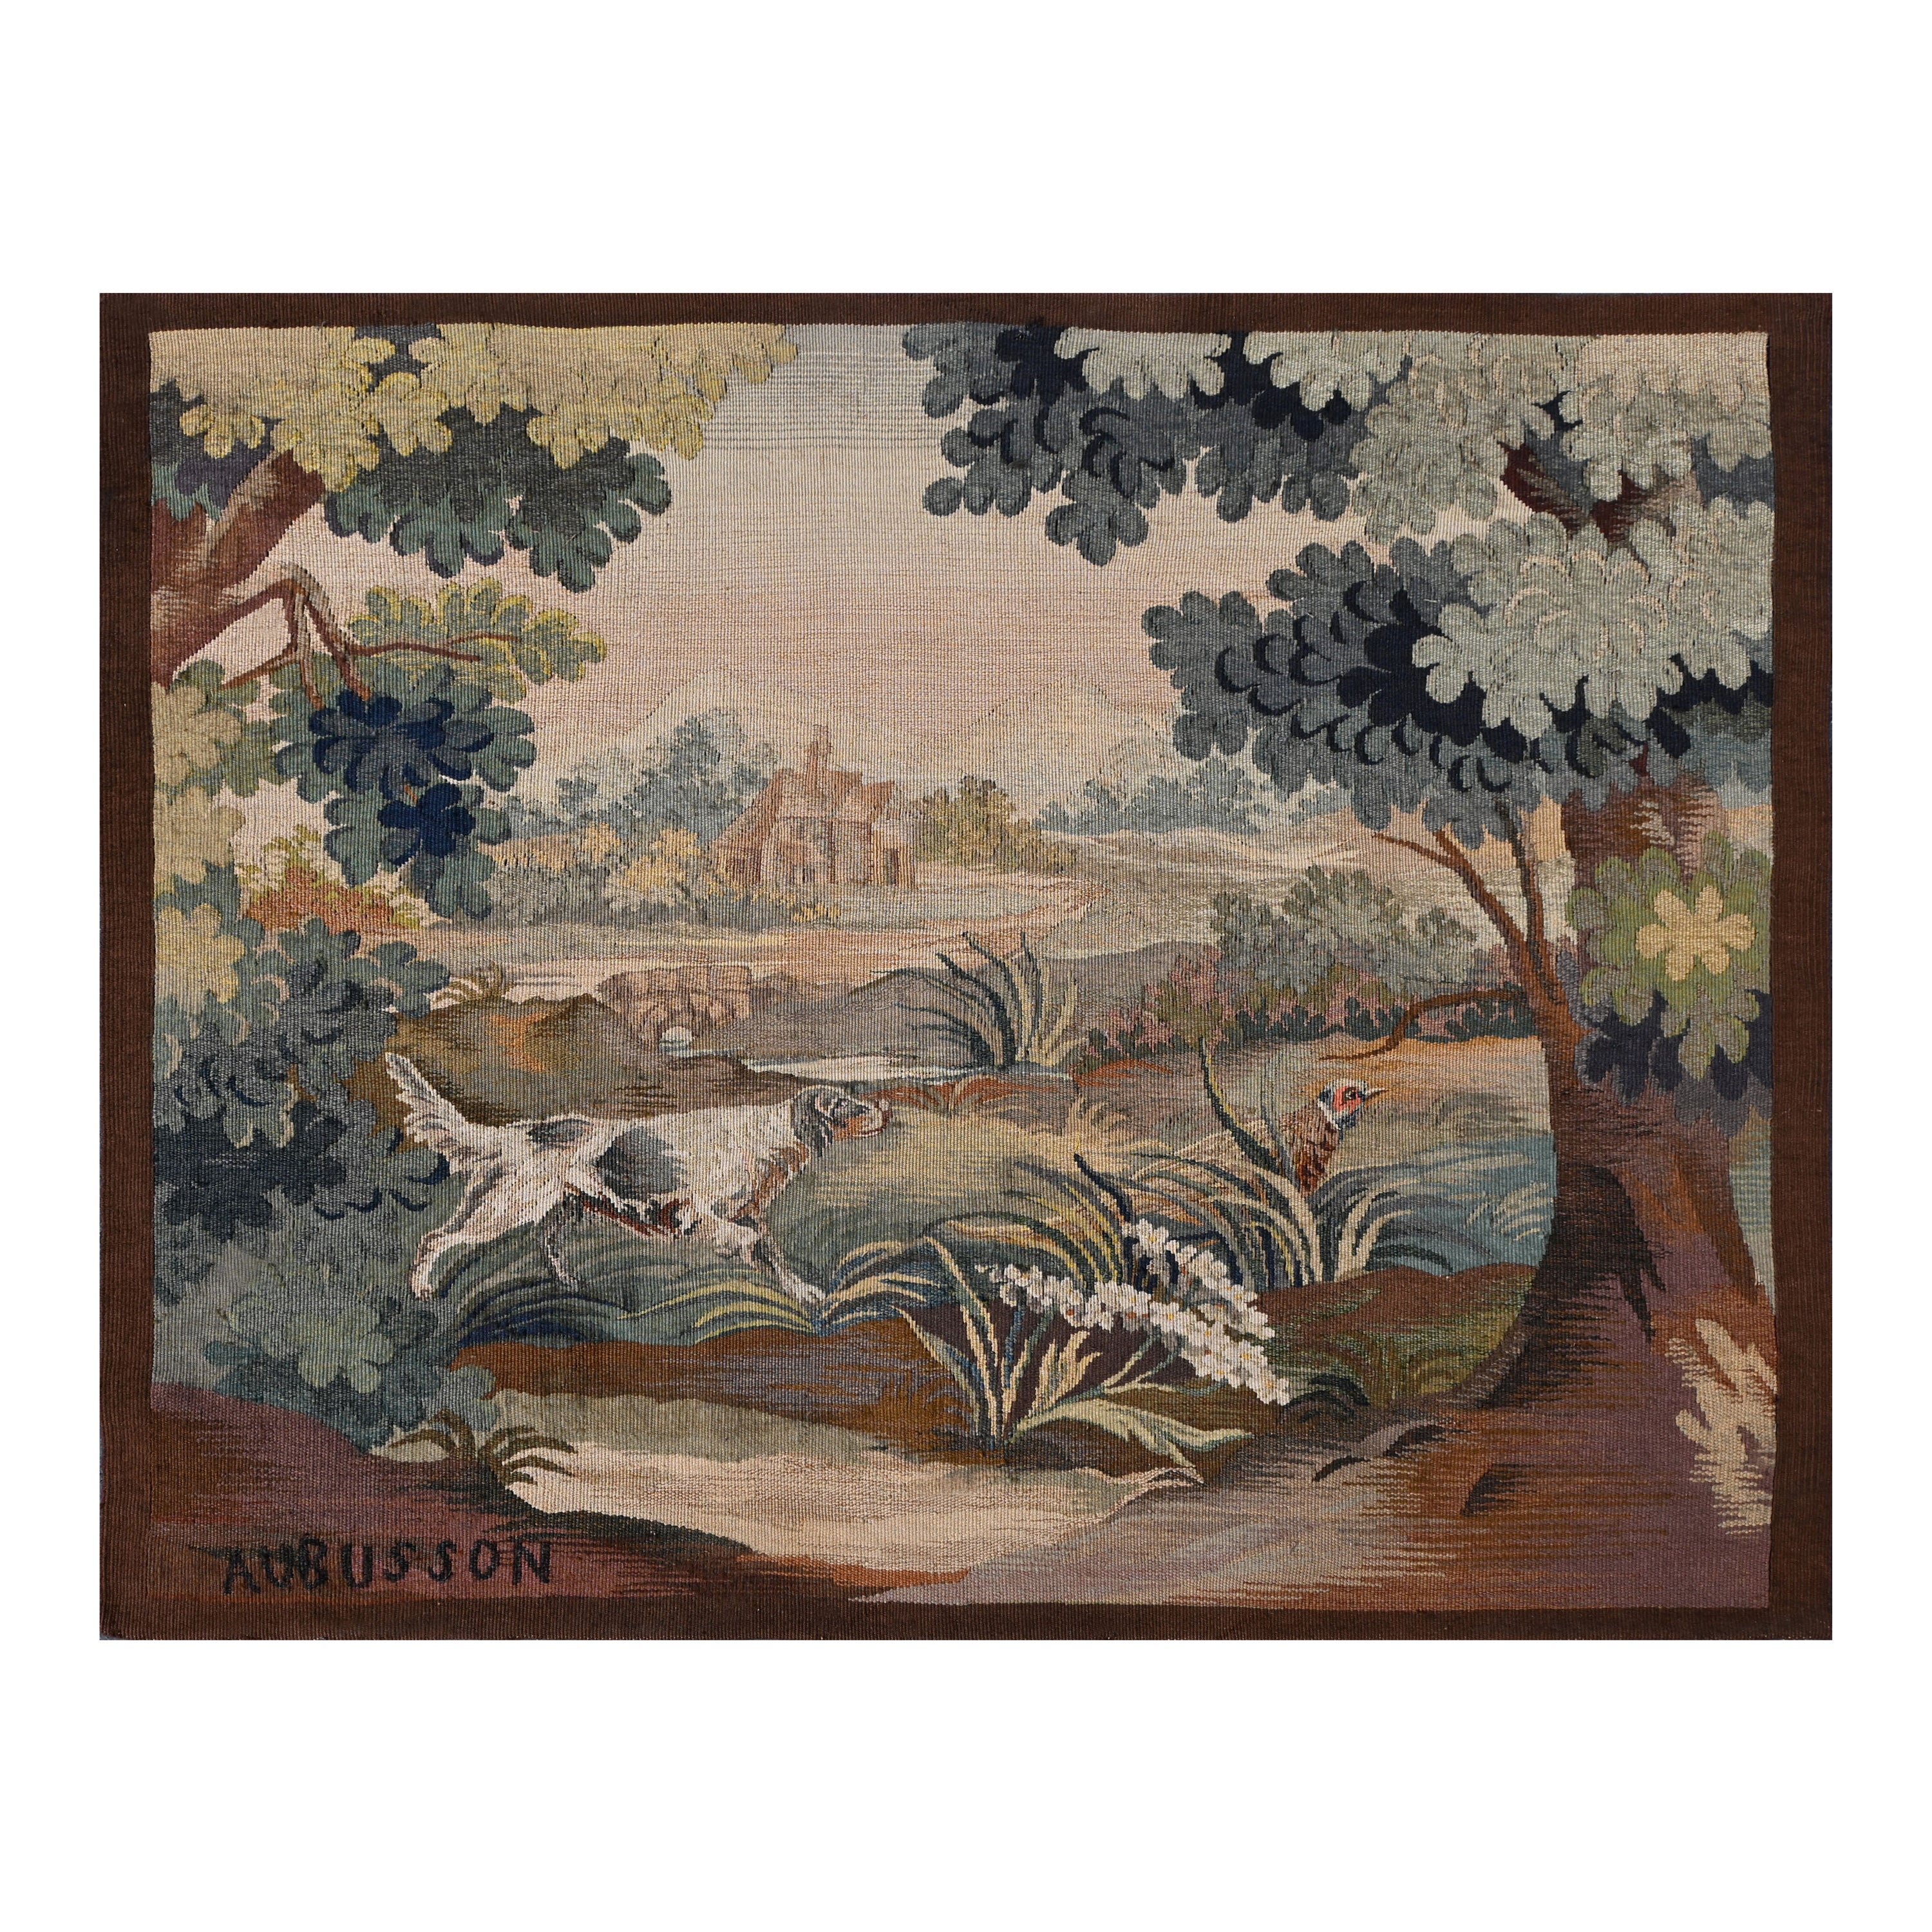 Aubusson Tapestry - The Dog And Pheasant After Jean-baptiste Oudry - N° 1398